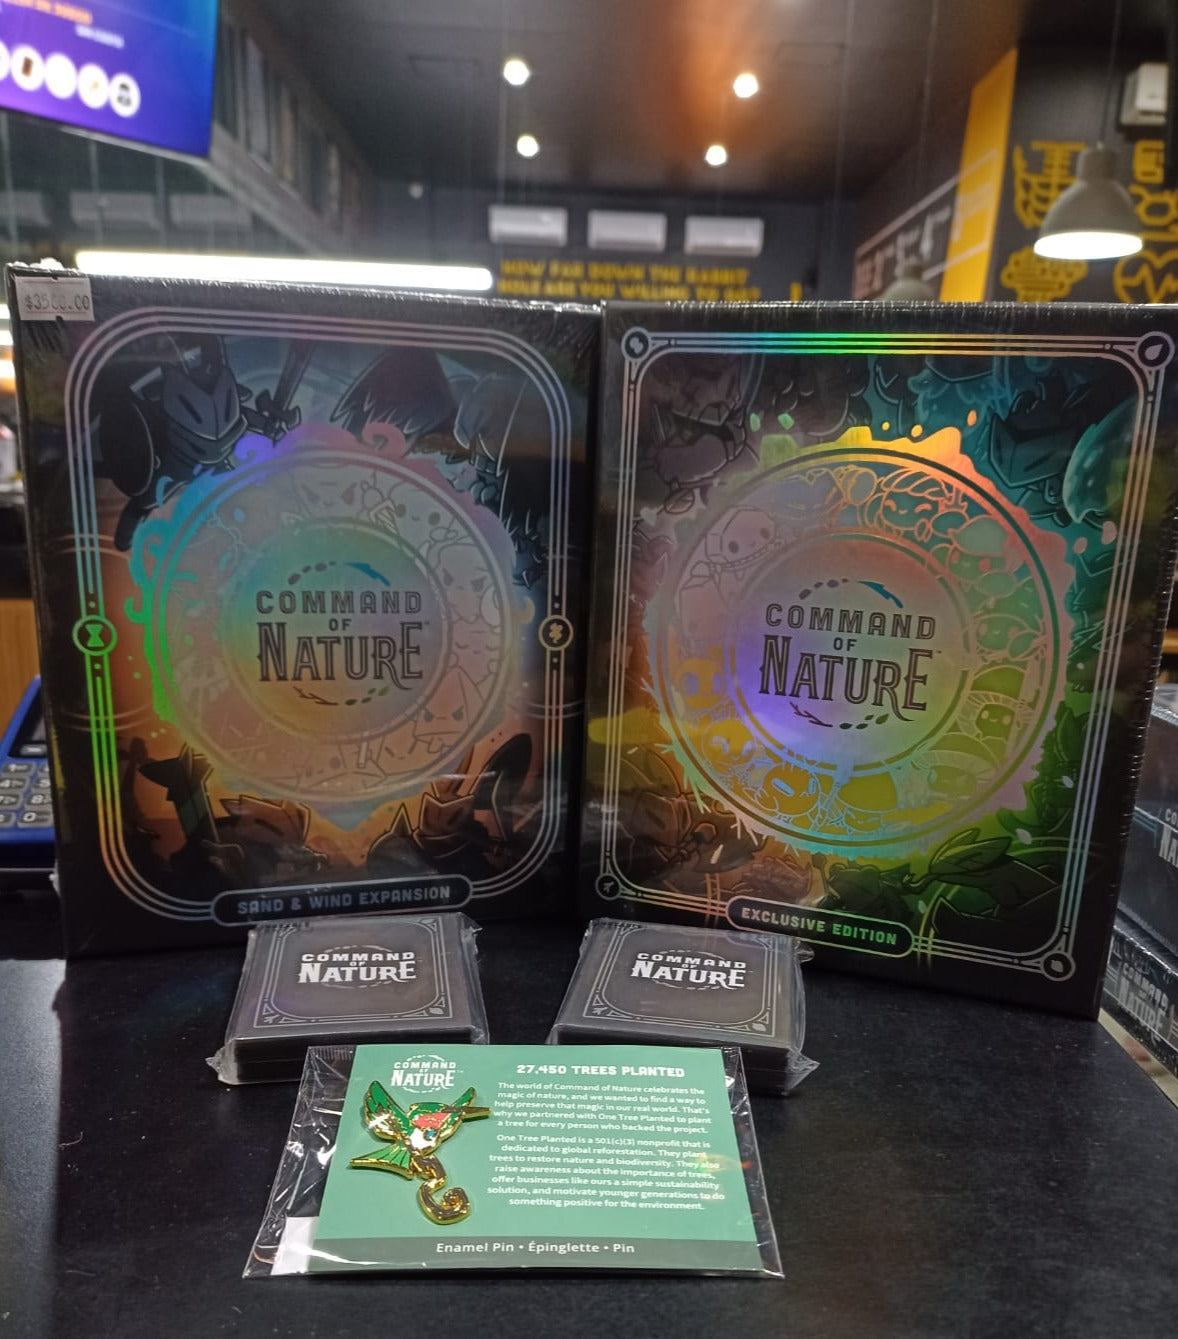 Command of Nature Exclusive Edition